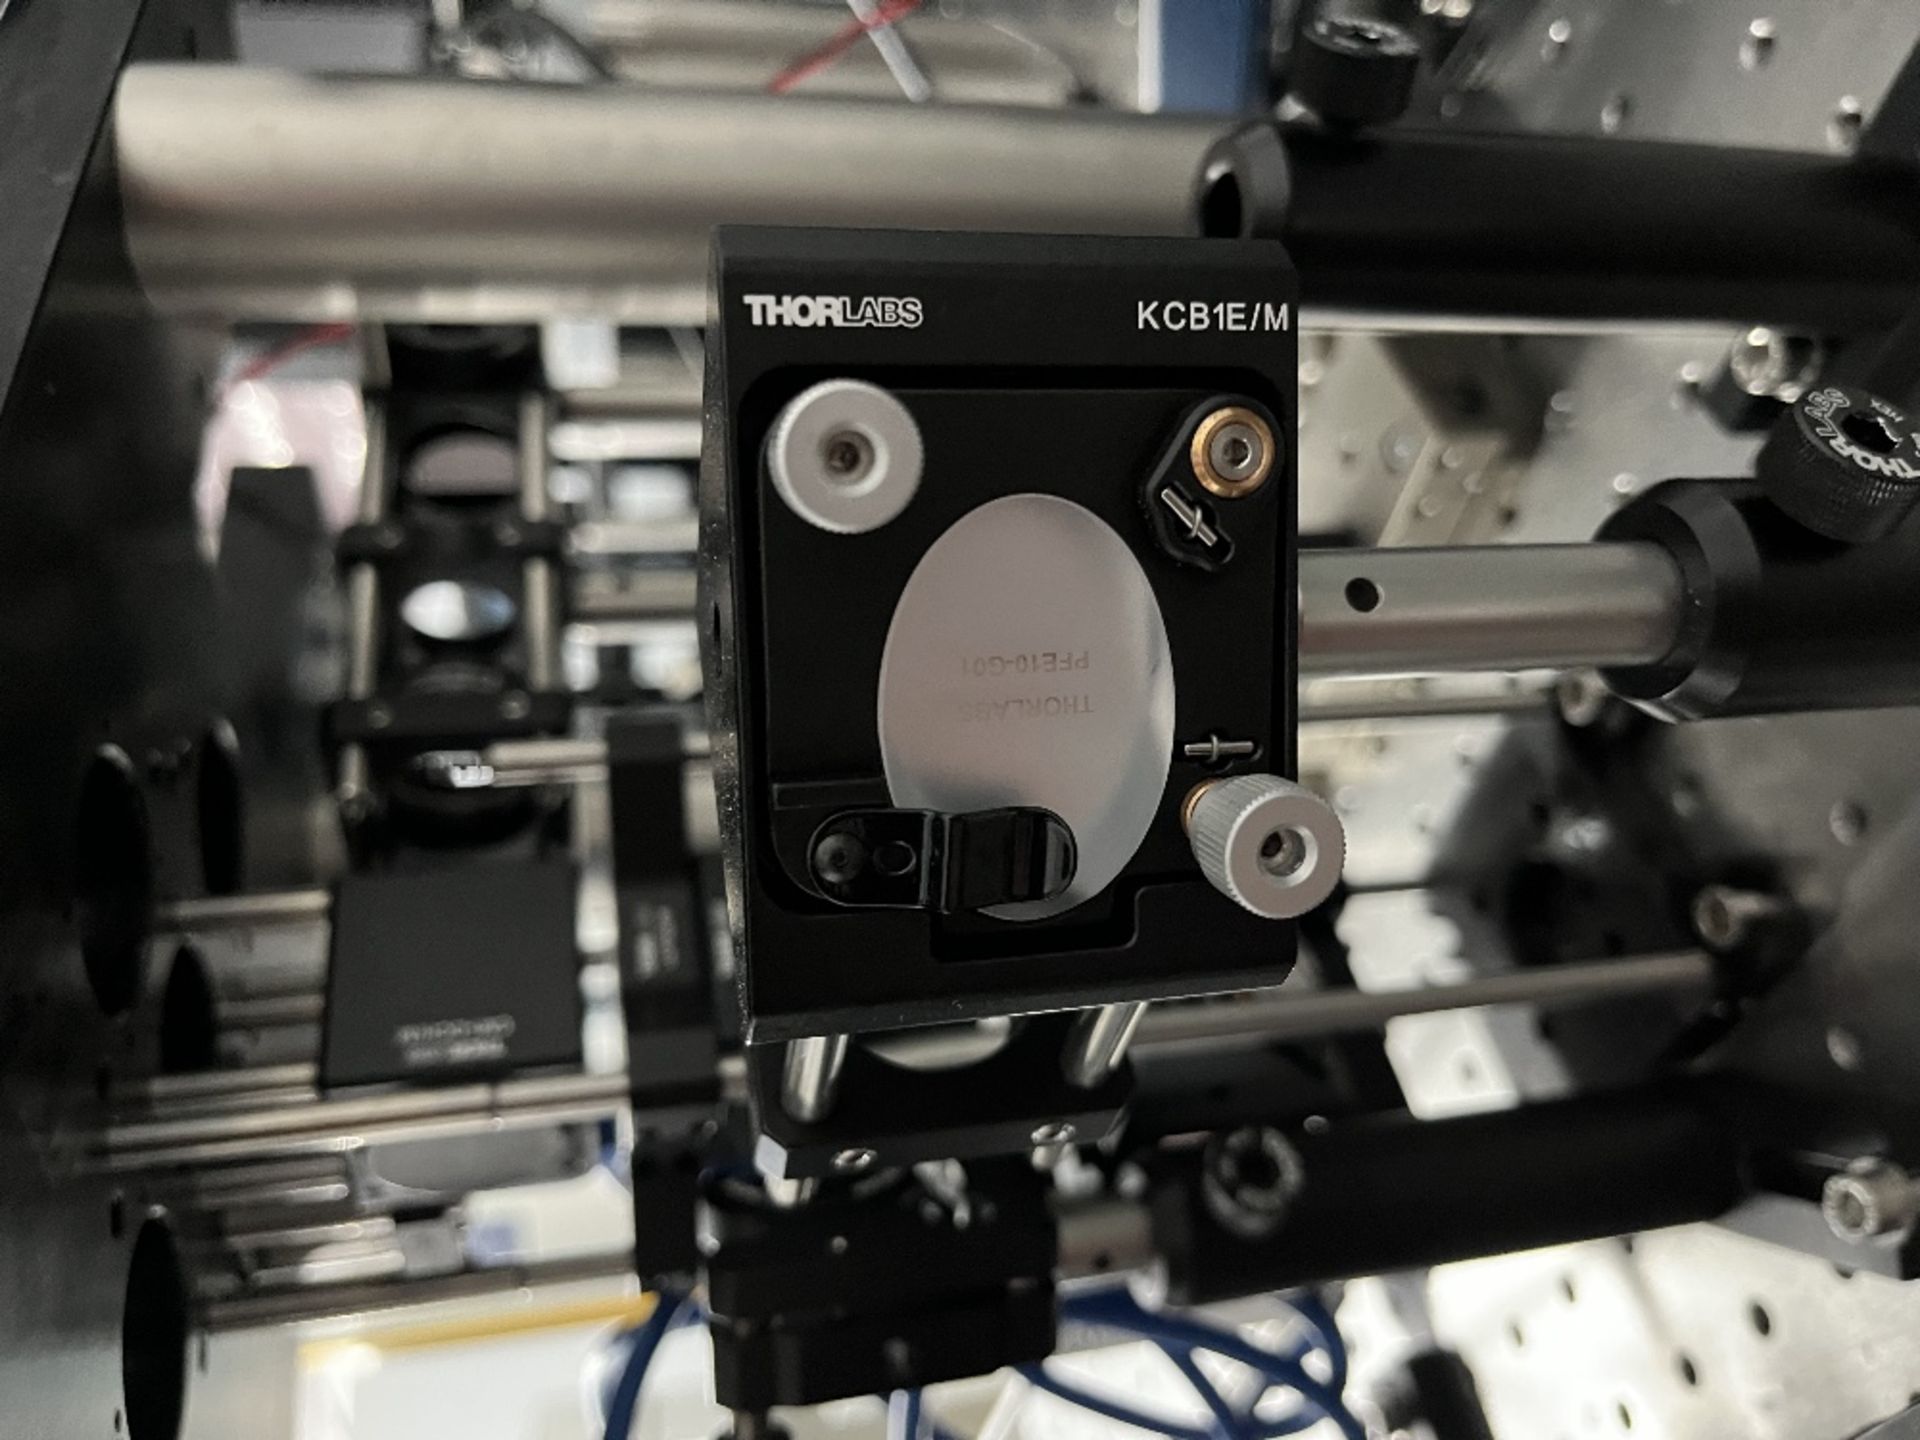 Thorlabs Laser Scanning System, Various Optical & Mechanical Components, Breadboard & Passive Frame - Image 23 of 27